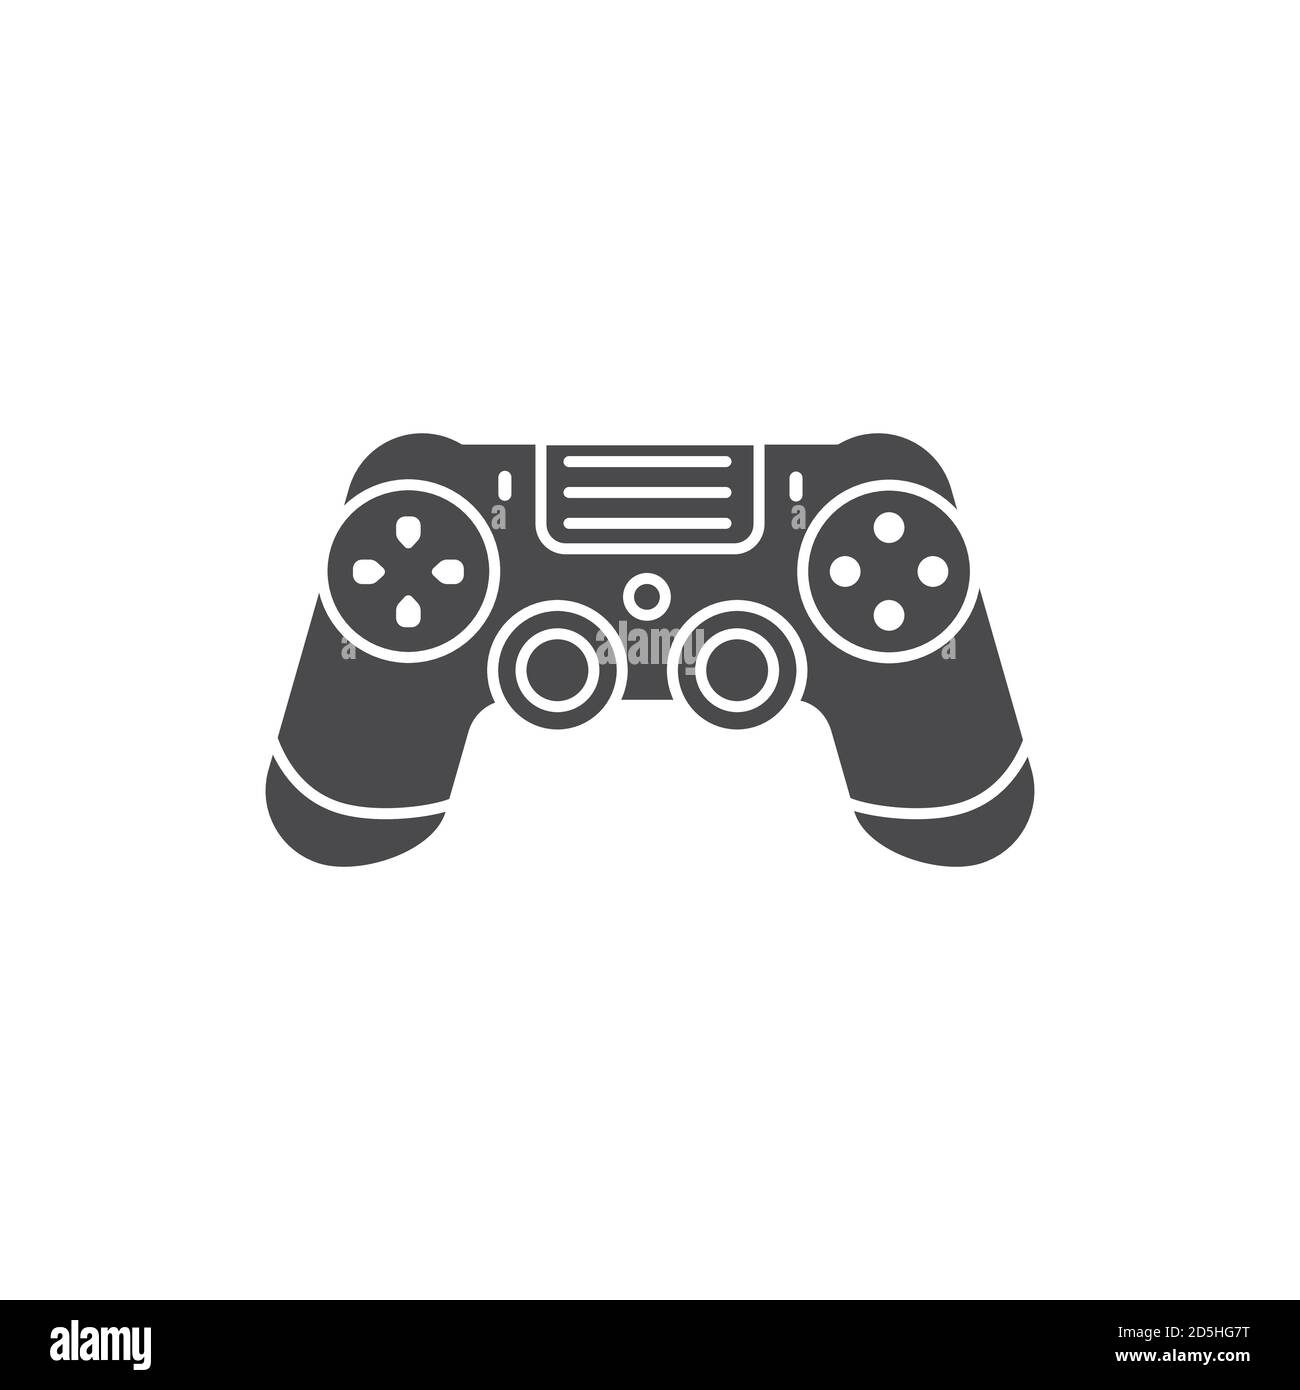 Joystick black glyph icon. Input device. Control a character or machine in a computer program, such as a plane in a flight simulator. Pictogram for Stock Vector